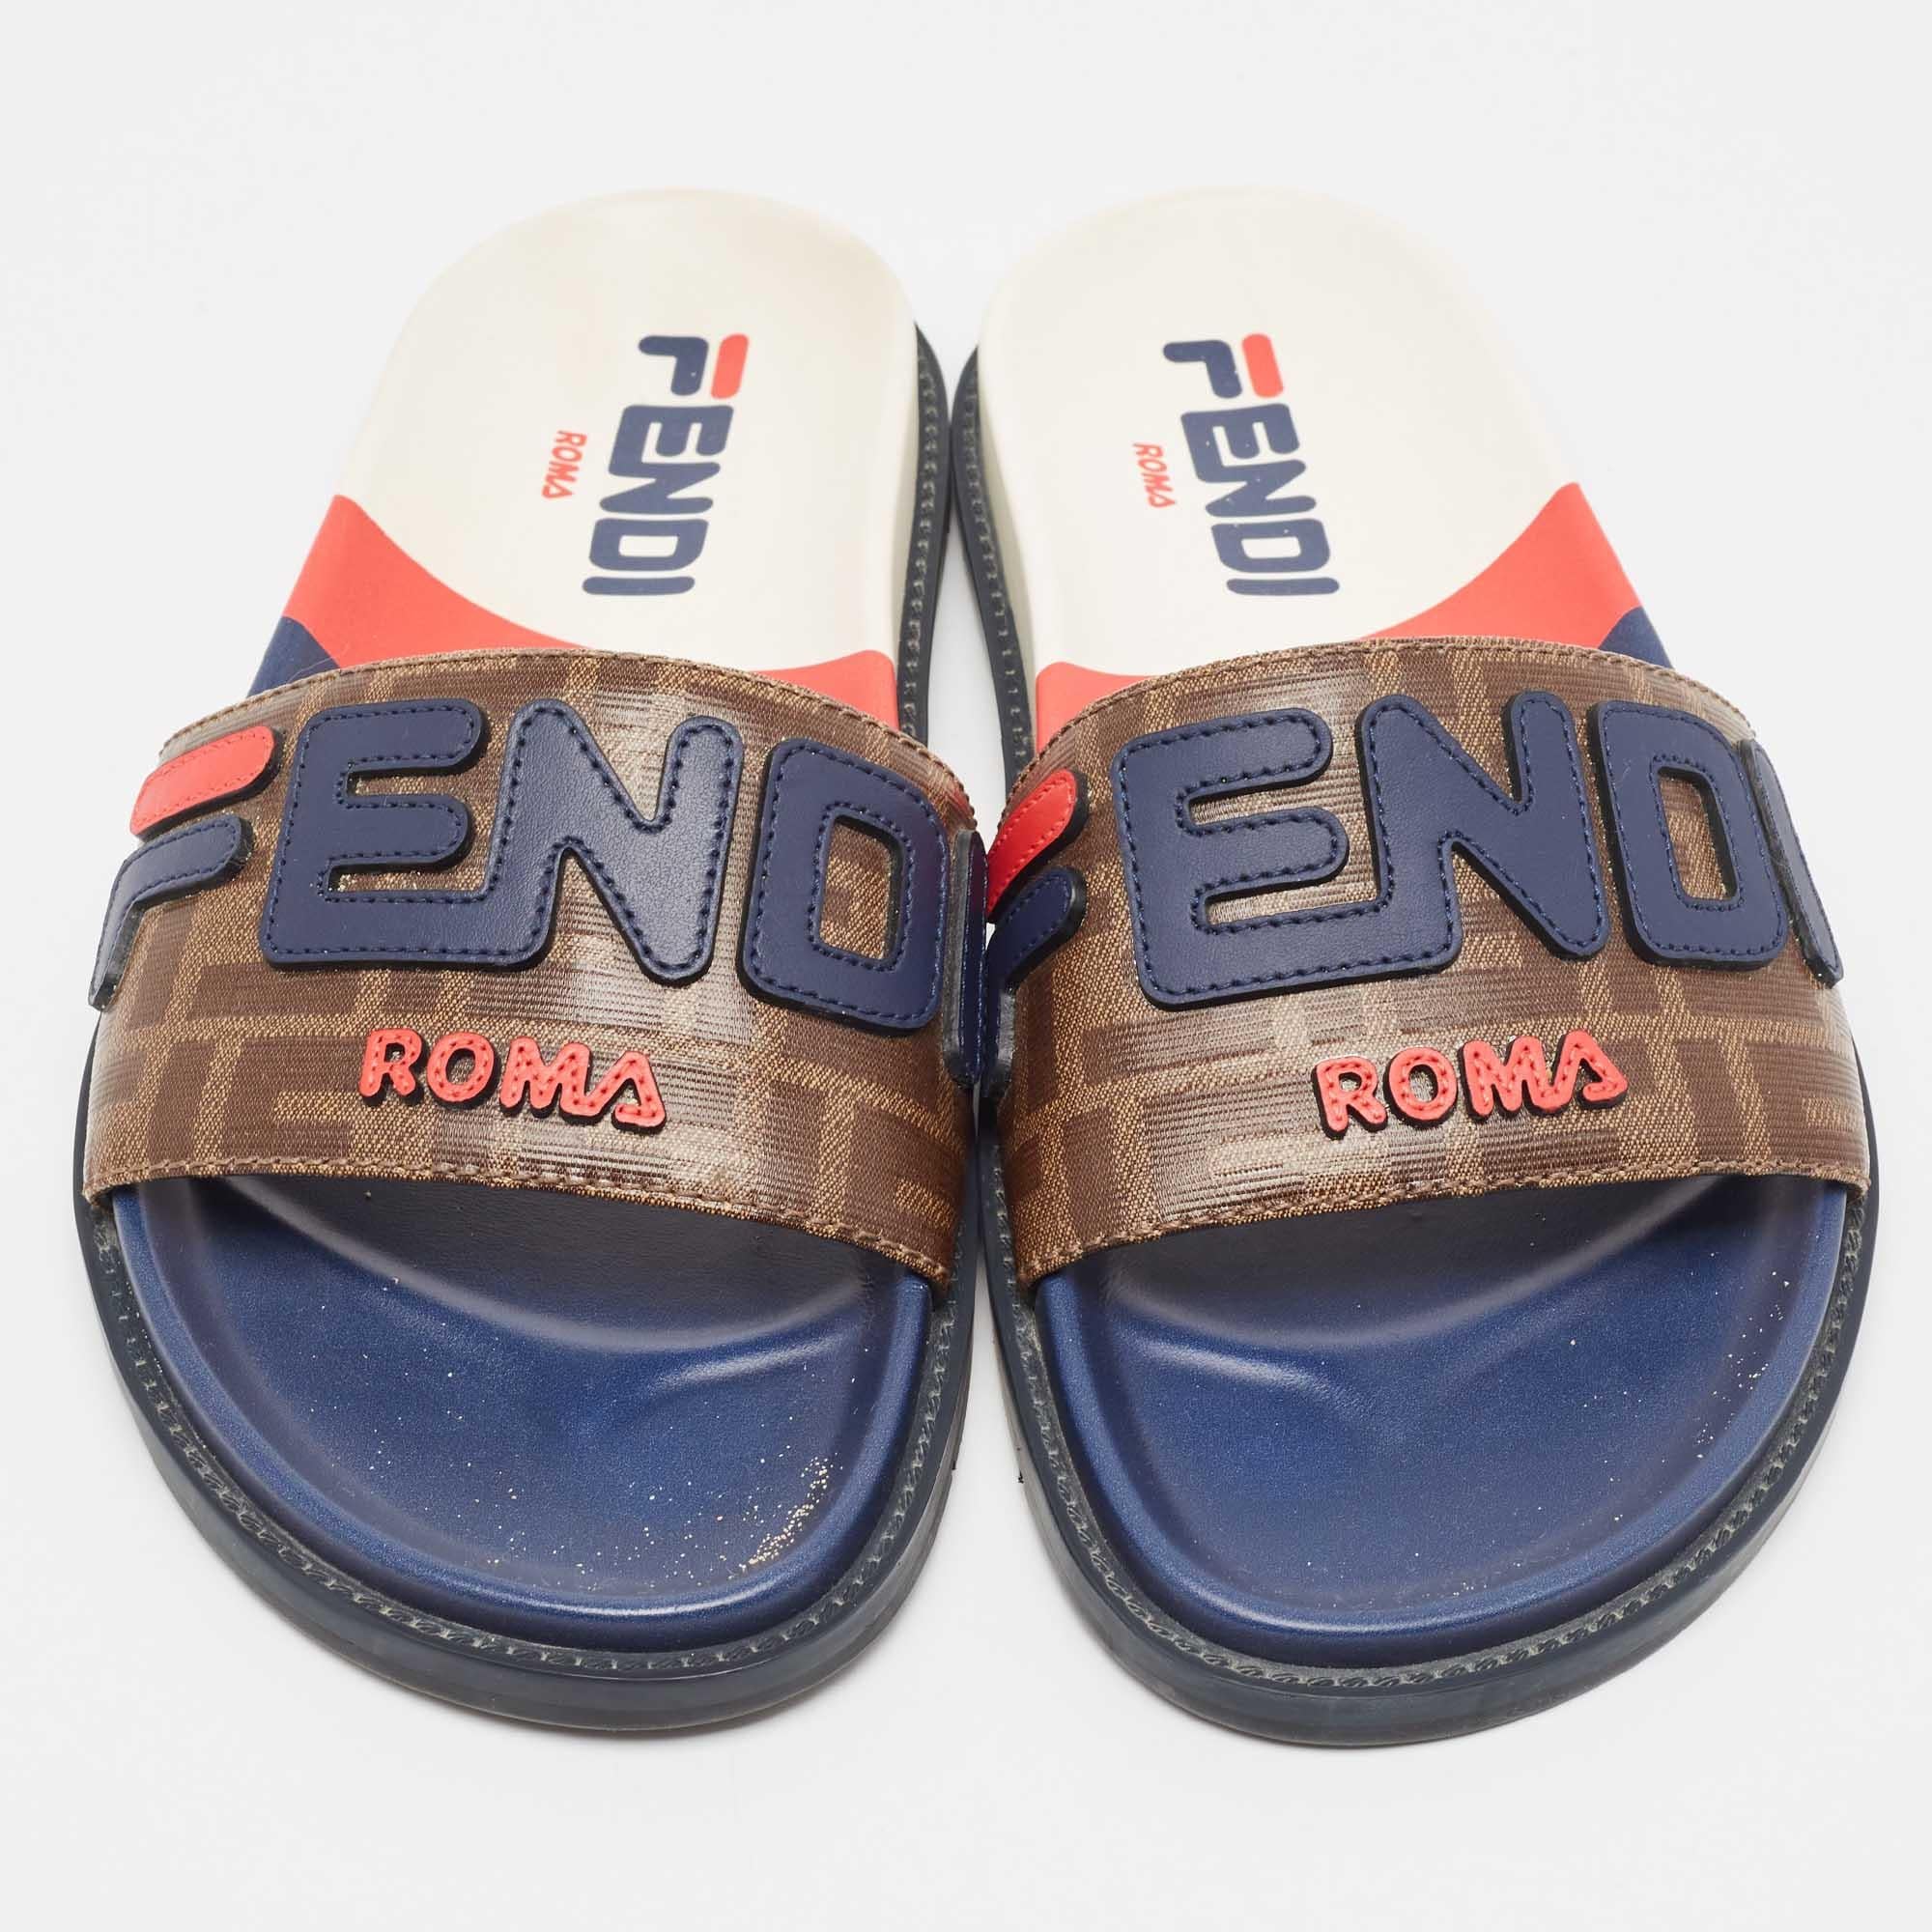 These flats are from the collaboration between Fendi and Fila. They feature FF logo canvas straps and durable rubber soles. Fila's signature red and blue as well as other elements are seamlessly incorporated into the Fendi pair.

Includes: Original